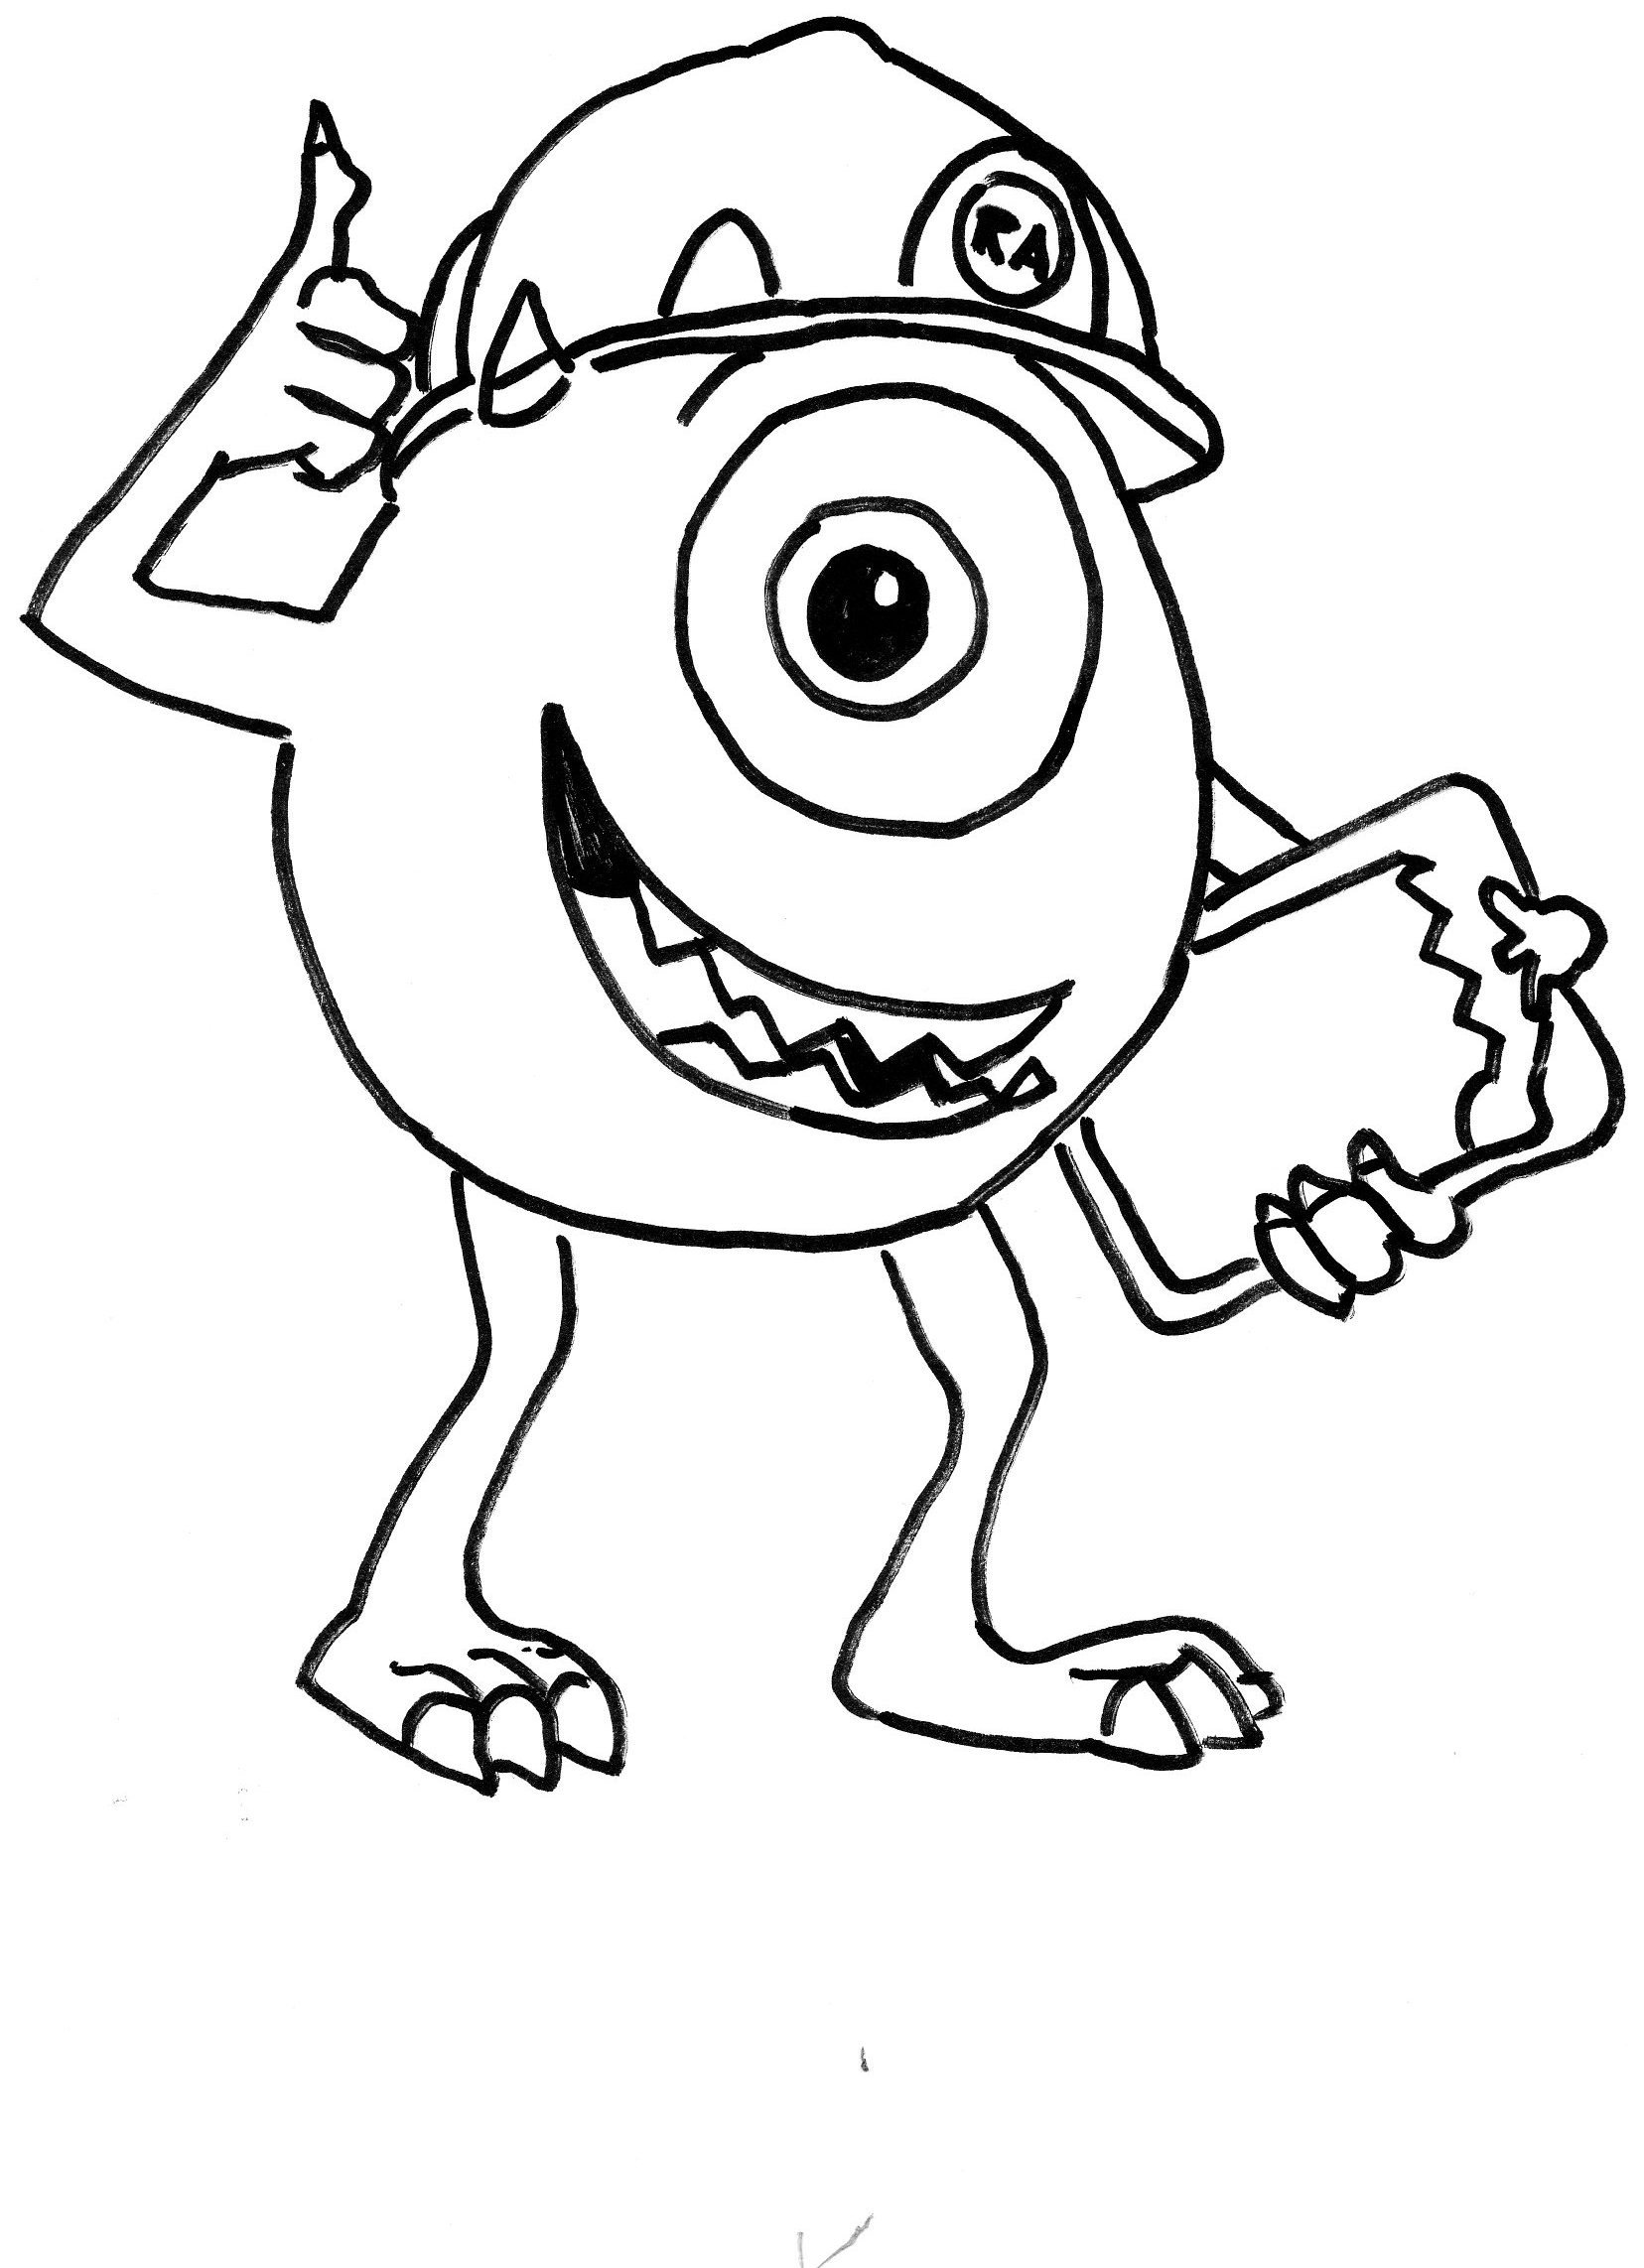 Coloring Sheets For The Boys
 Coloring Pages for Boys 2018 Dr Odd